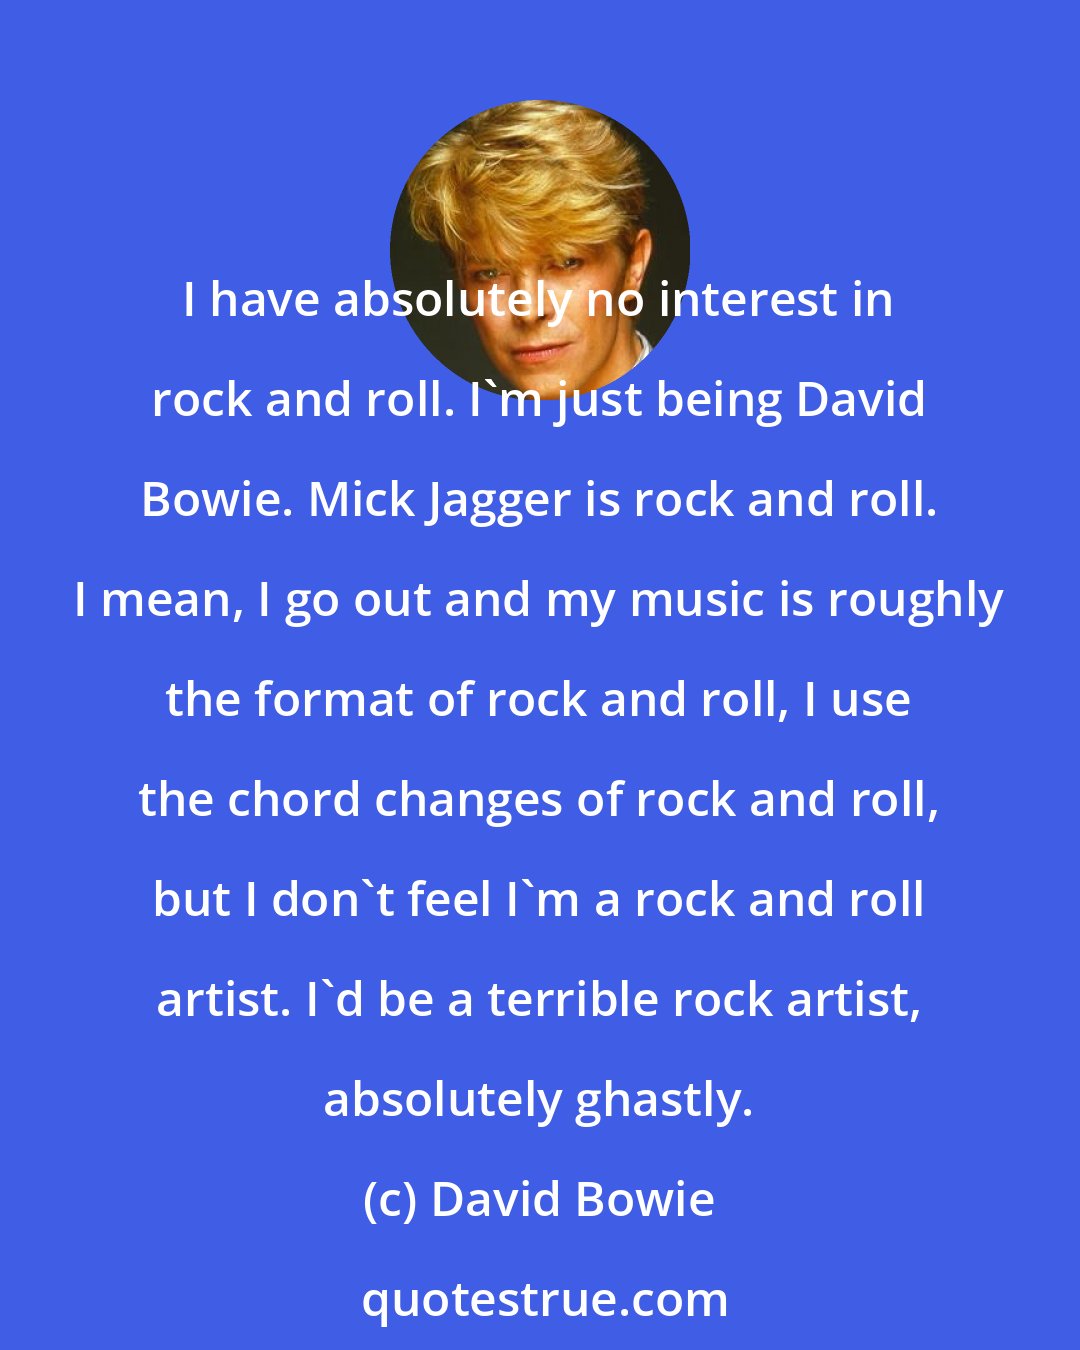 David Bowie: I have absolutely no interest in rock and roll. I'm just being David Bowie. Mick Jagger is rock and roll. I mean, I go out and my music is roughly the format of rock and roll, I use the chord changes of rock and roll, but I don't feel I'm a rock and roll artist. I'd be a terrible rock artist, absolutely ghastly.